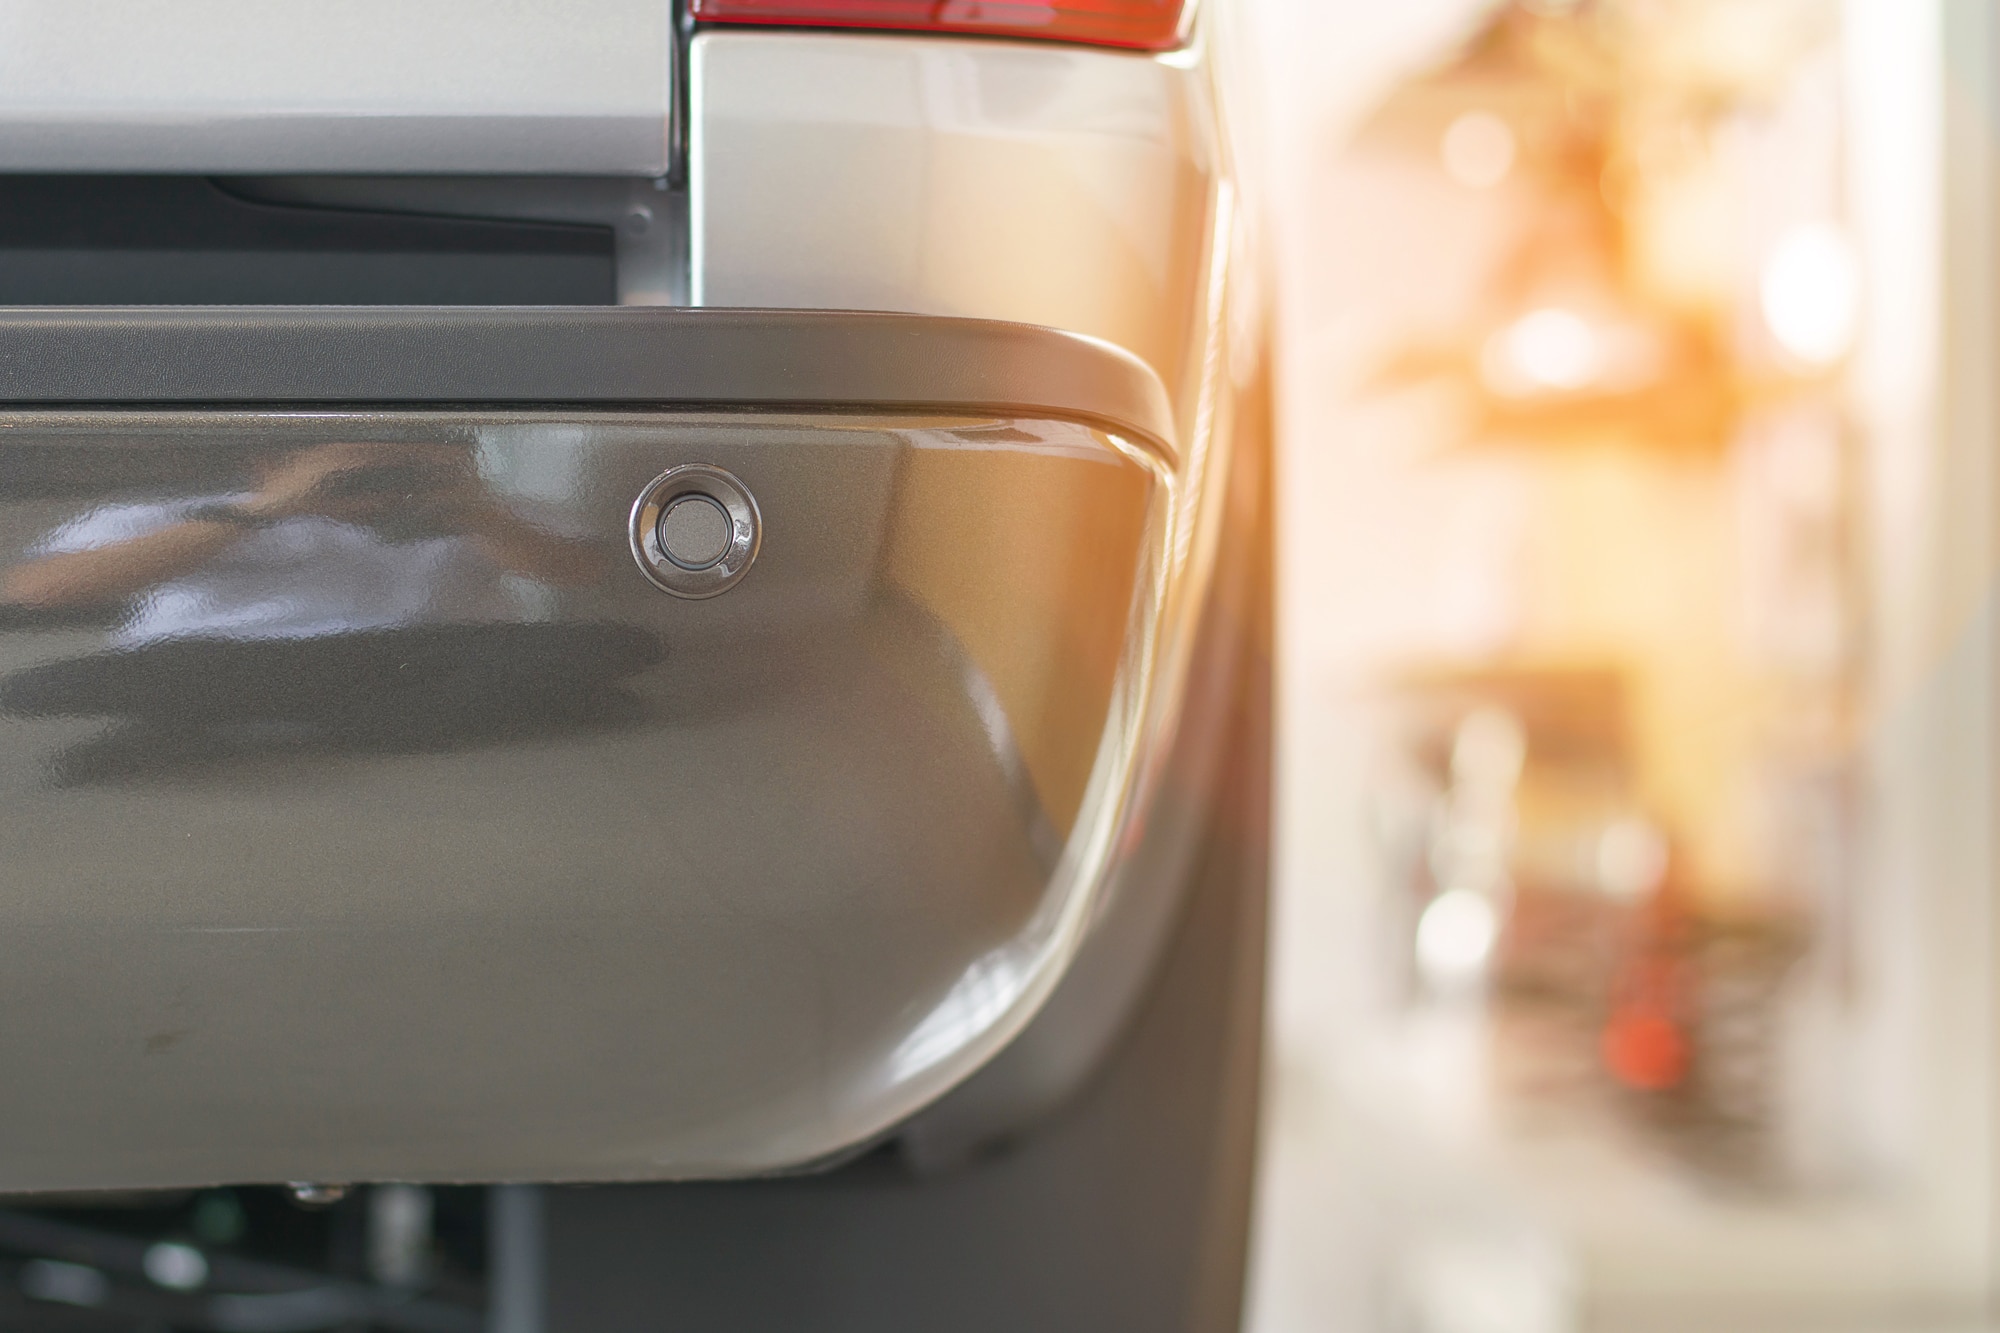 How to Add Parking Sensors to Your Car